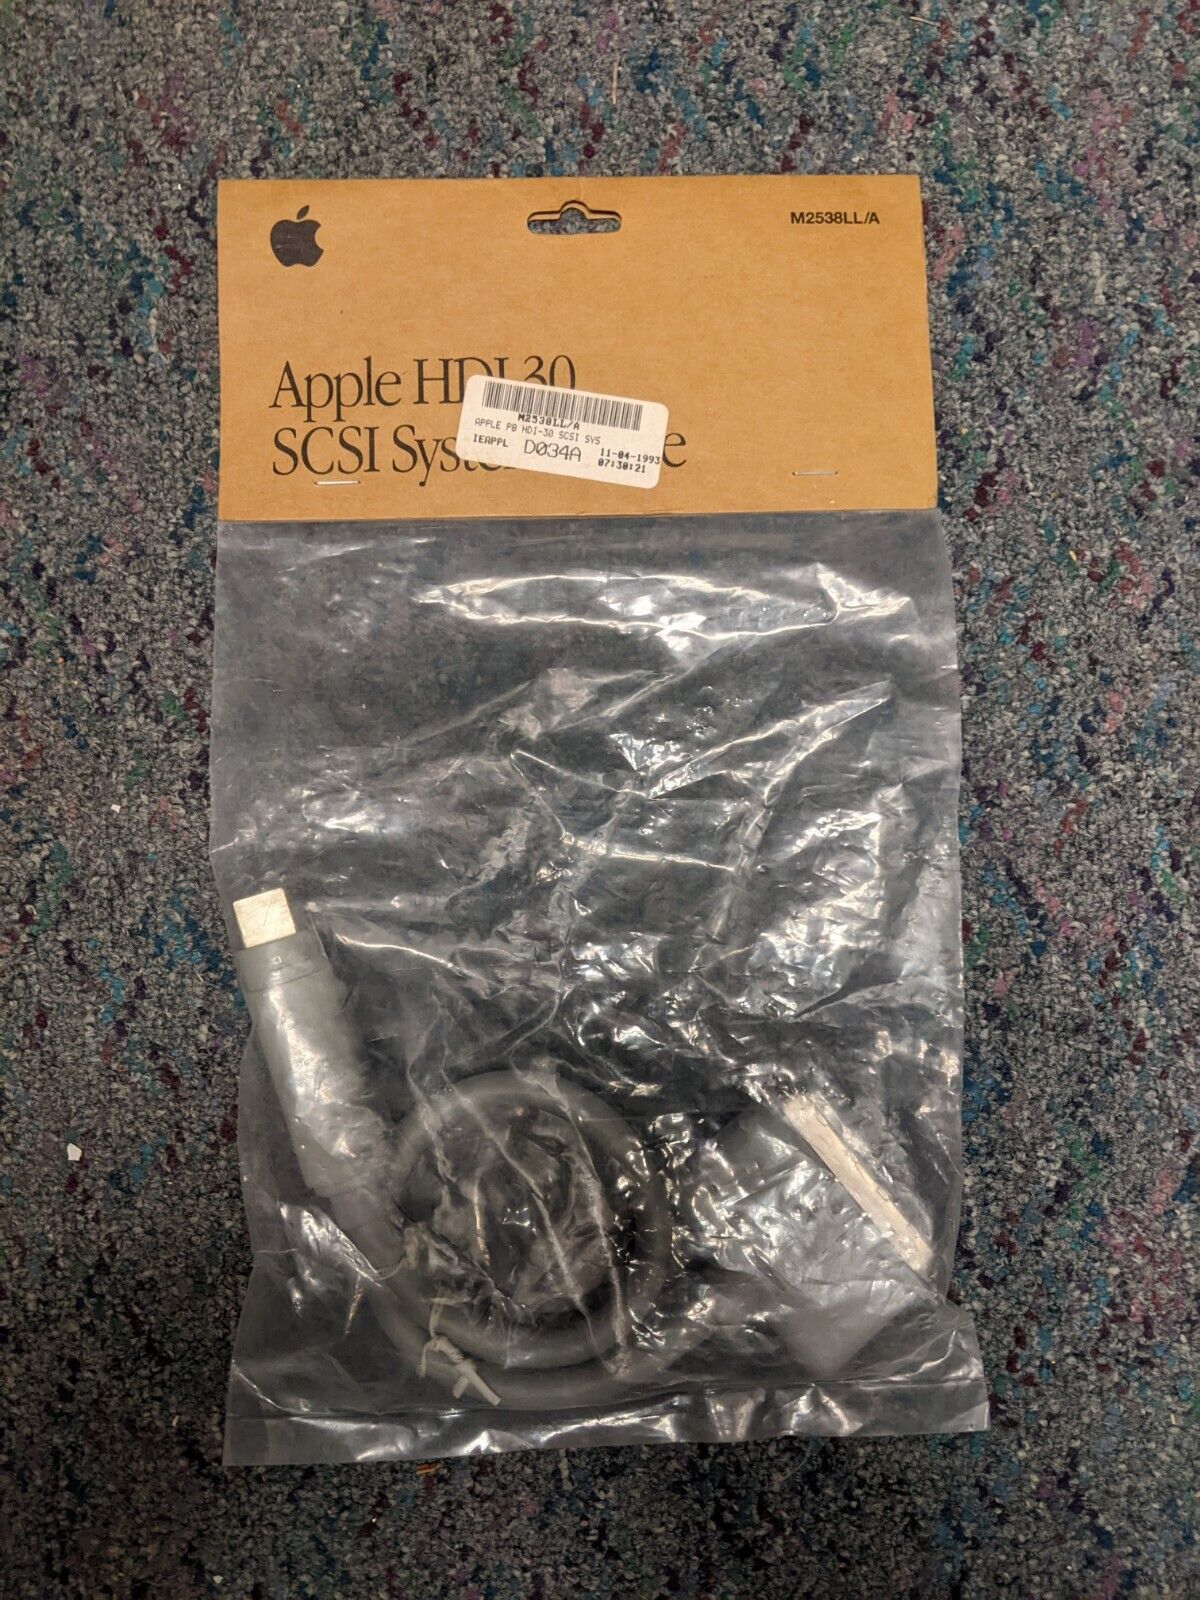 Genuine New in Packaging Apple HDI-30 SCSI System Cable M2538LL/A